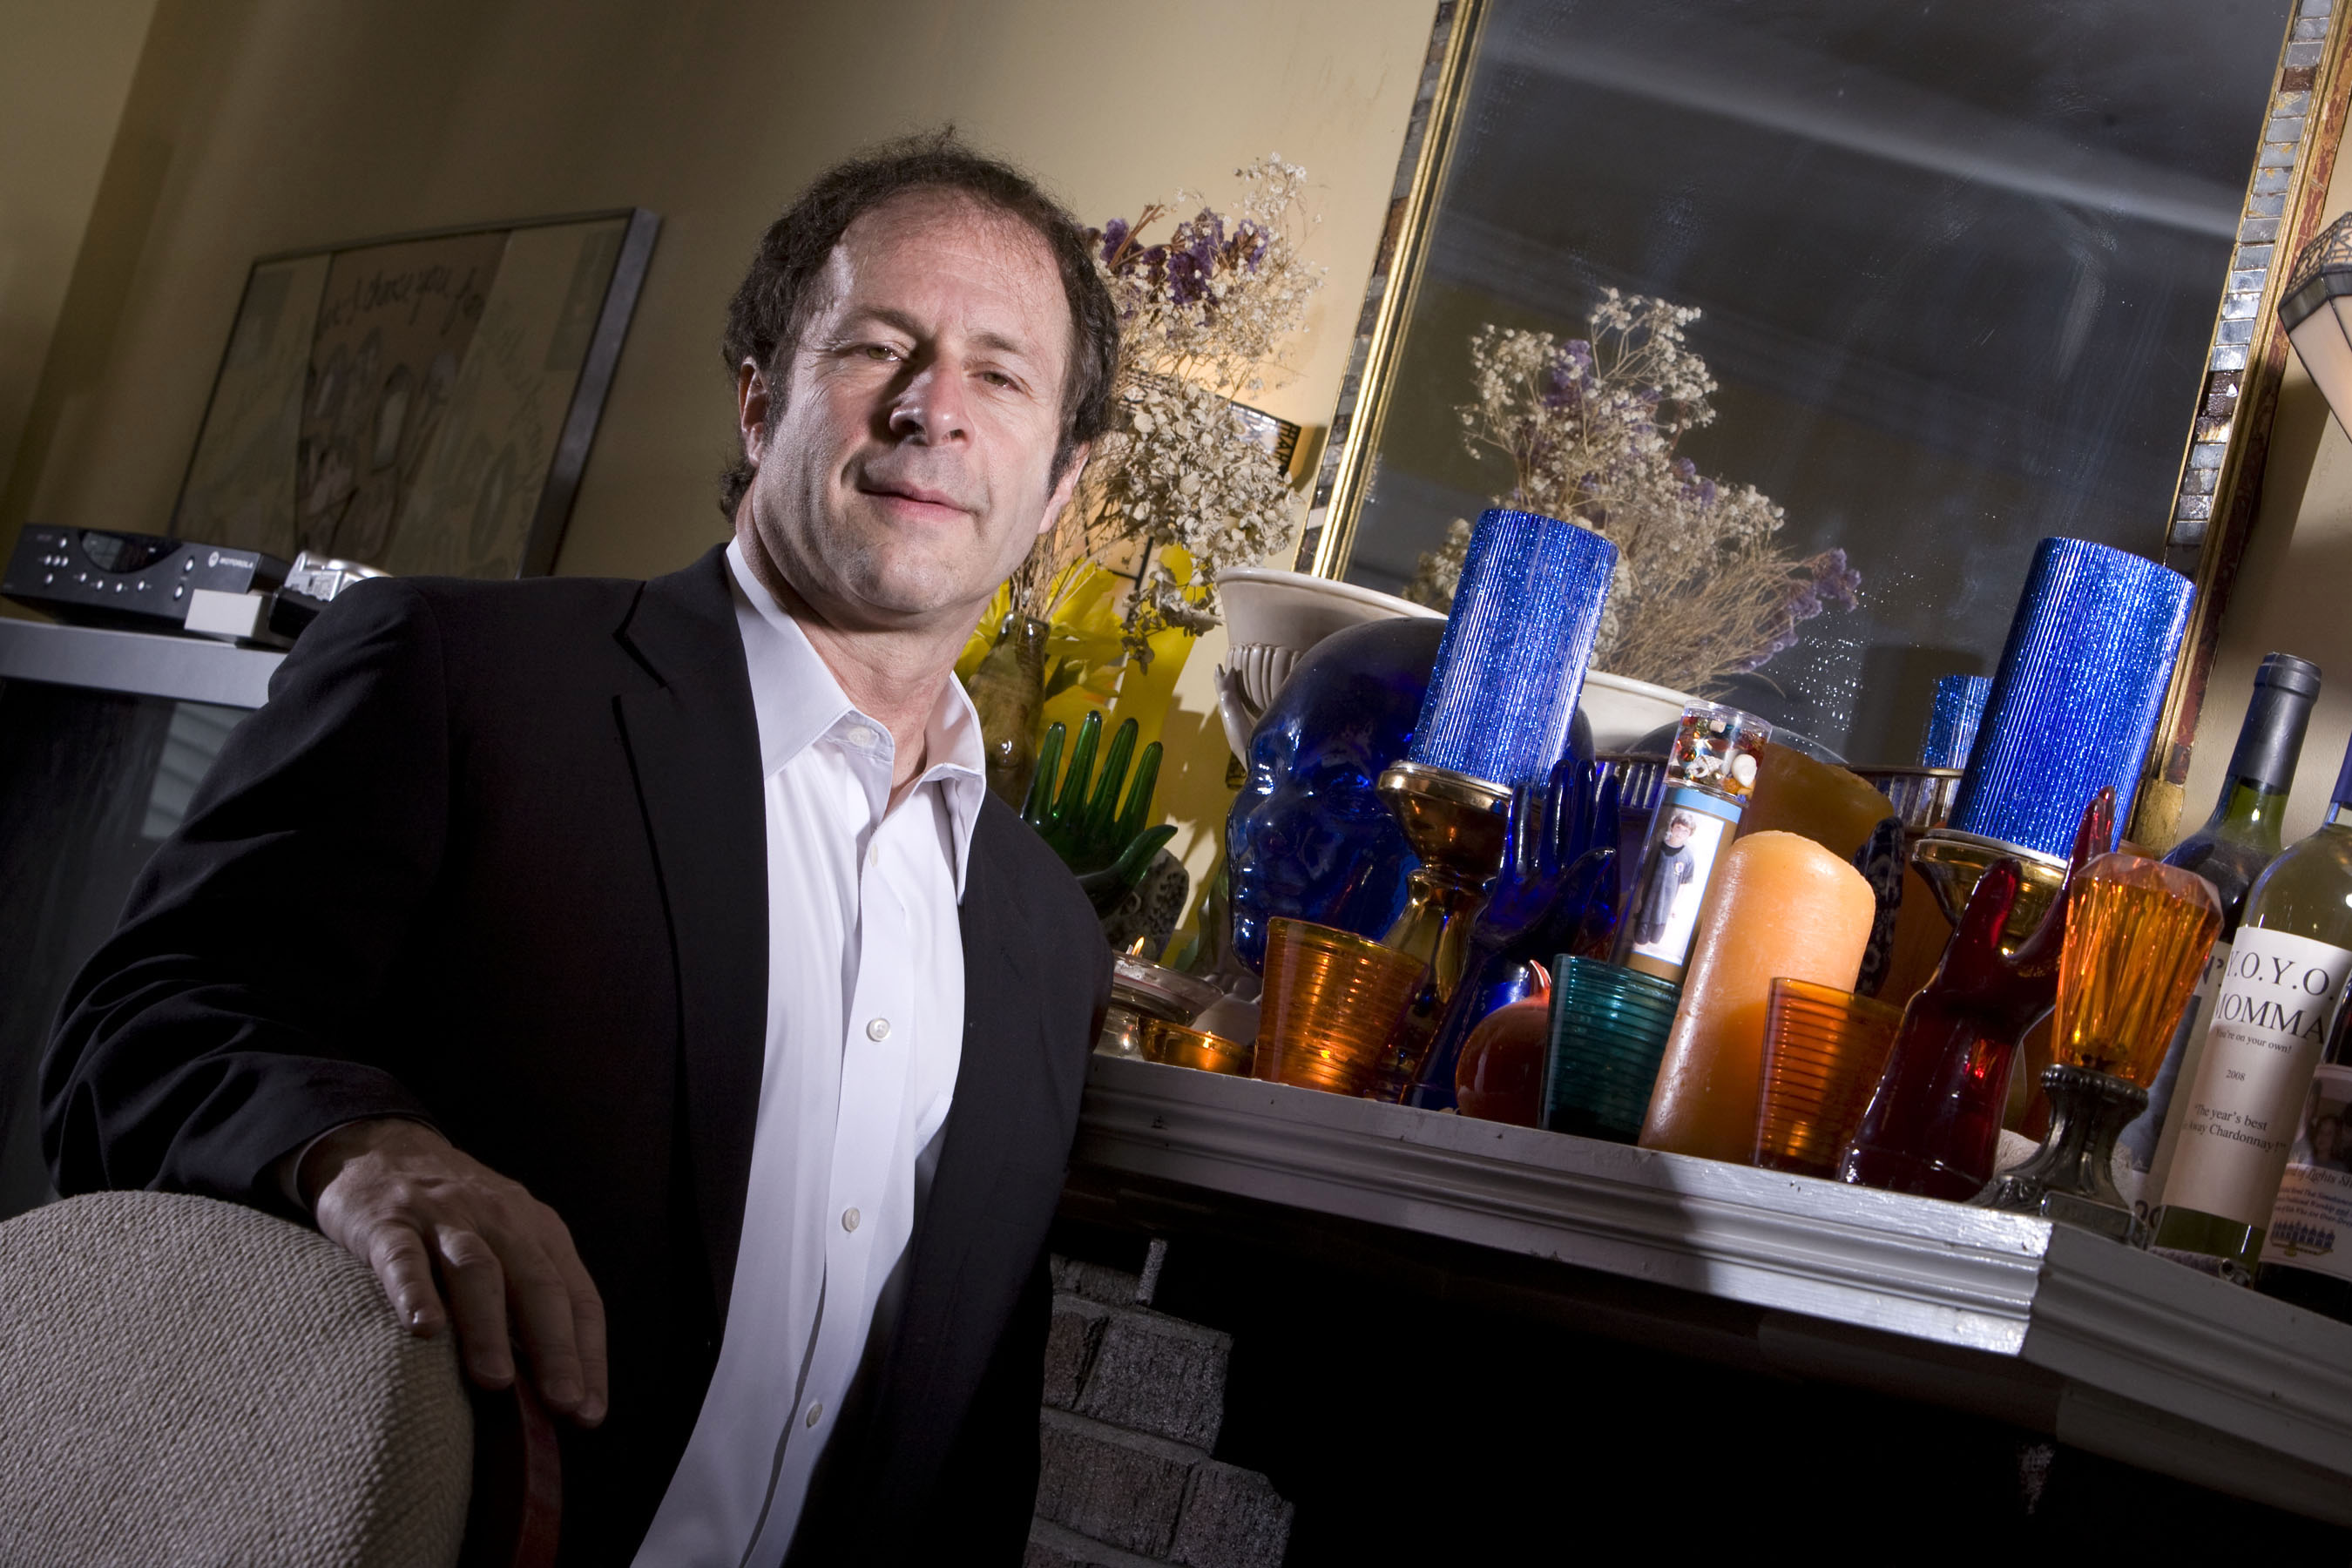 Rick Doblin, president and founder of the Multidisciplinary Association for Psychedelic Studies, poses for a portrait at his home in Belmont, Massachusetts, U.S., on Friday, April 11, 2008. Four decades after the Grateful Dead and Timothy Leary made acid trips a counter-cultural rite of passage, Rick Doblin is trying to shake the drug's hippie image and reclaim its use as a medicine. (Bloomberg—Bloomberg via Getty Images)